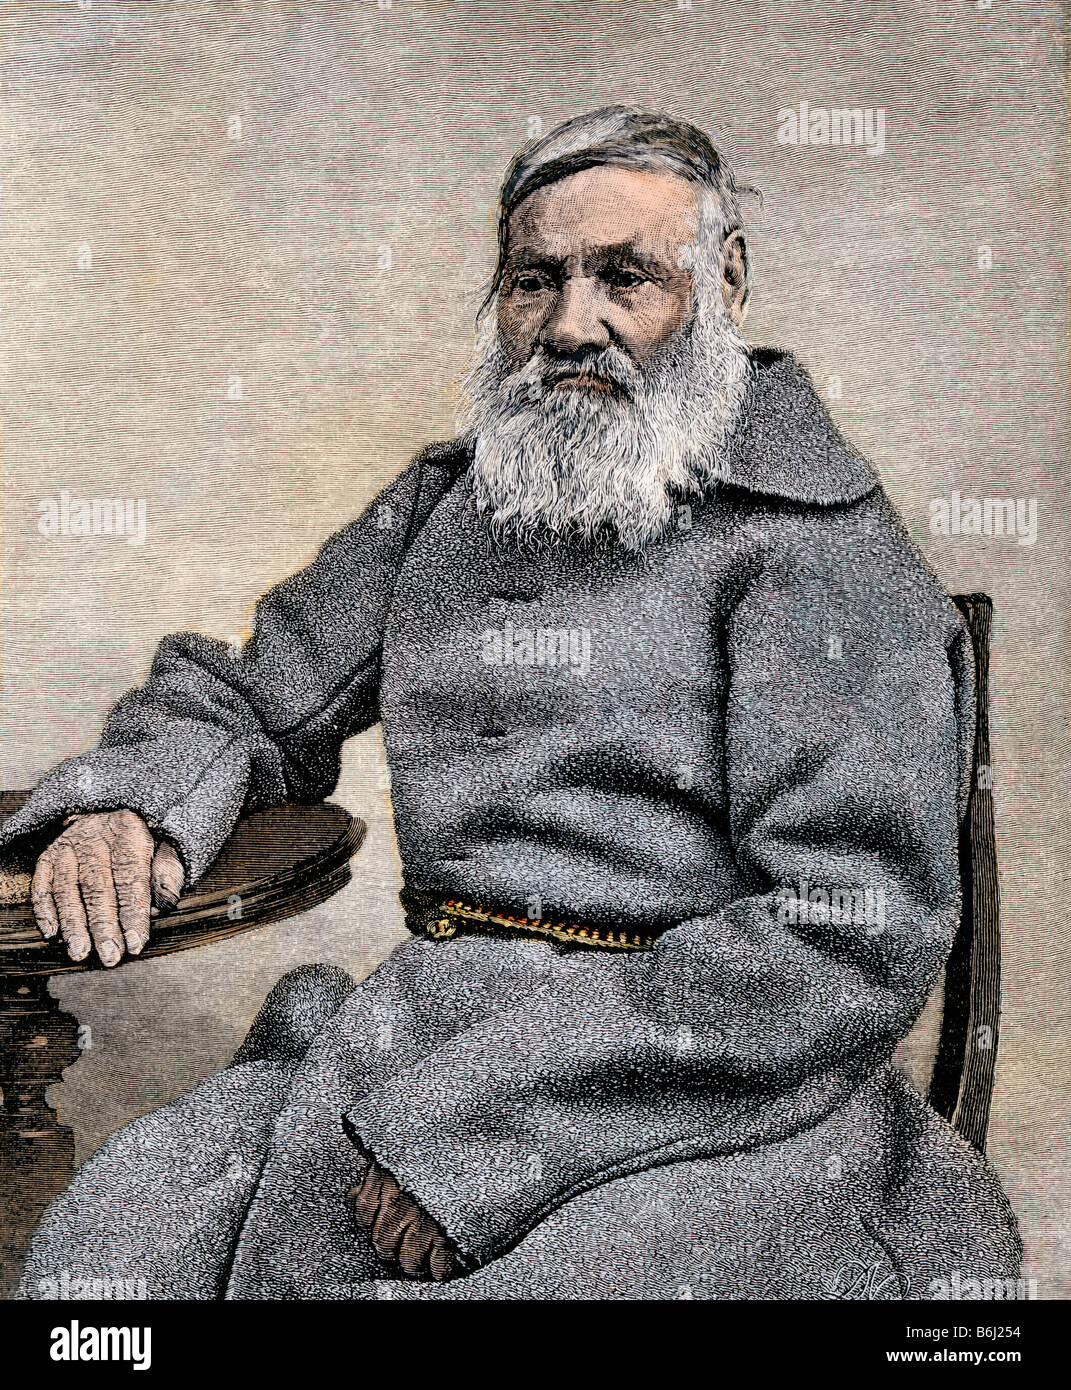 Russian convict sentenced to hard labor in Siberia at age 65, 1880s. Hand-colored halftone of a photograph Stock Photo